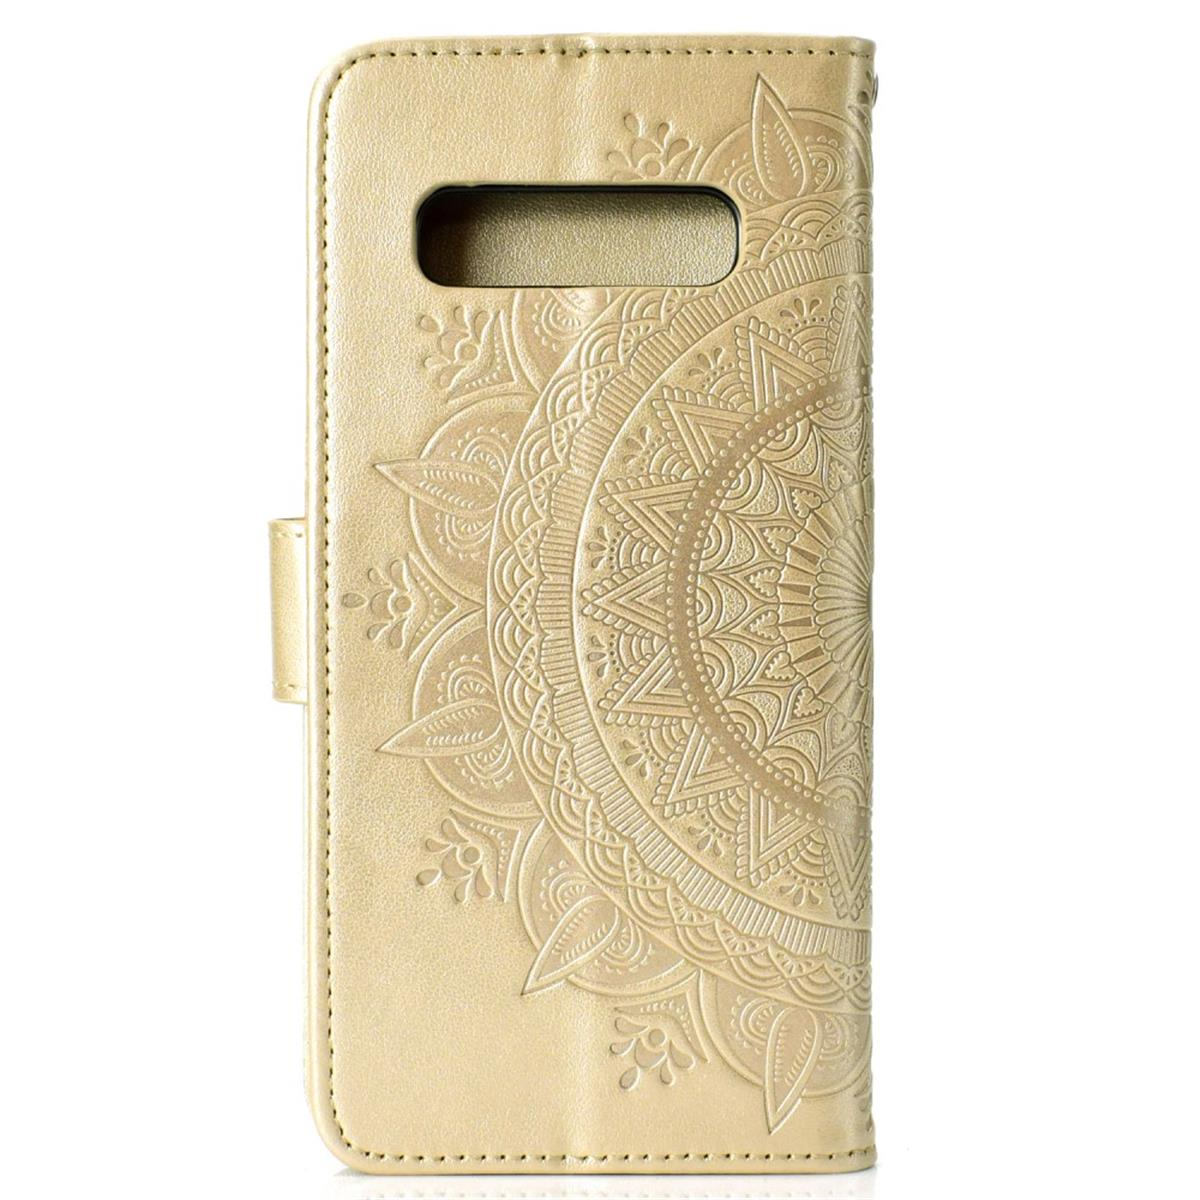 COVERKINGZ mit Samsung, Mandala [Plus], Bookcover, Galaxy Klapphülle S10+ Muster, Gold